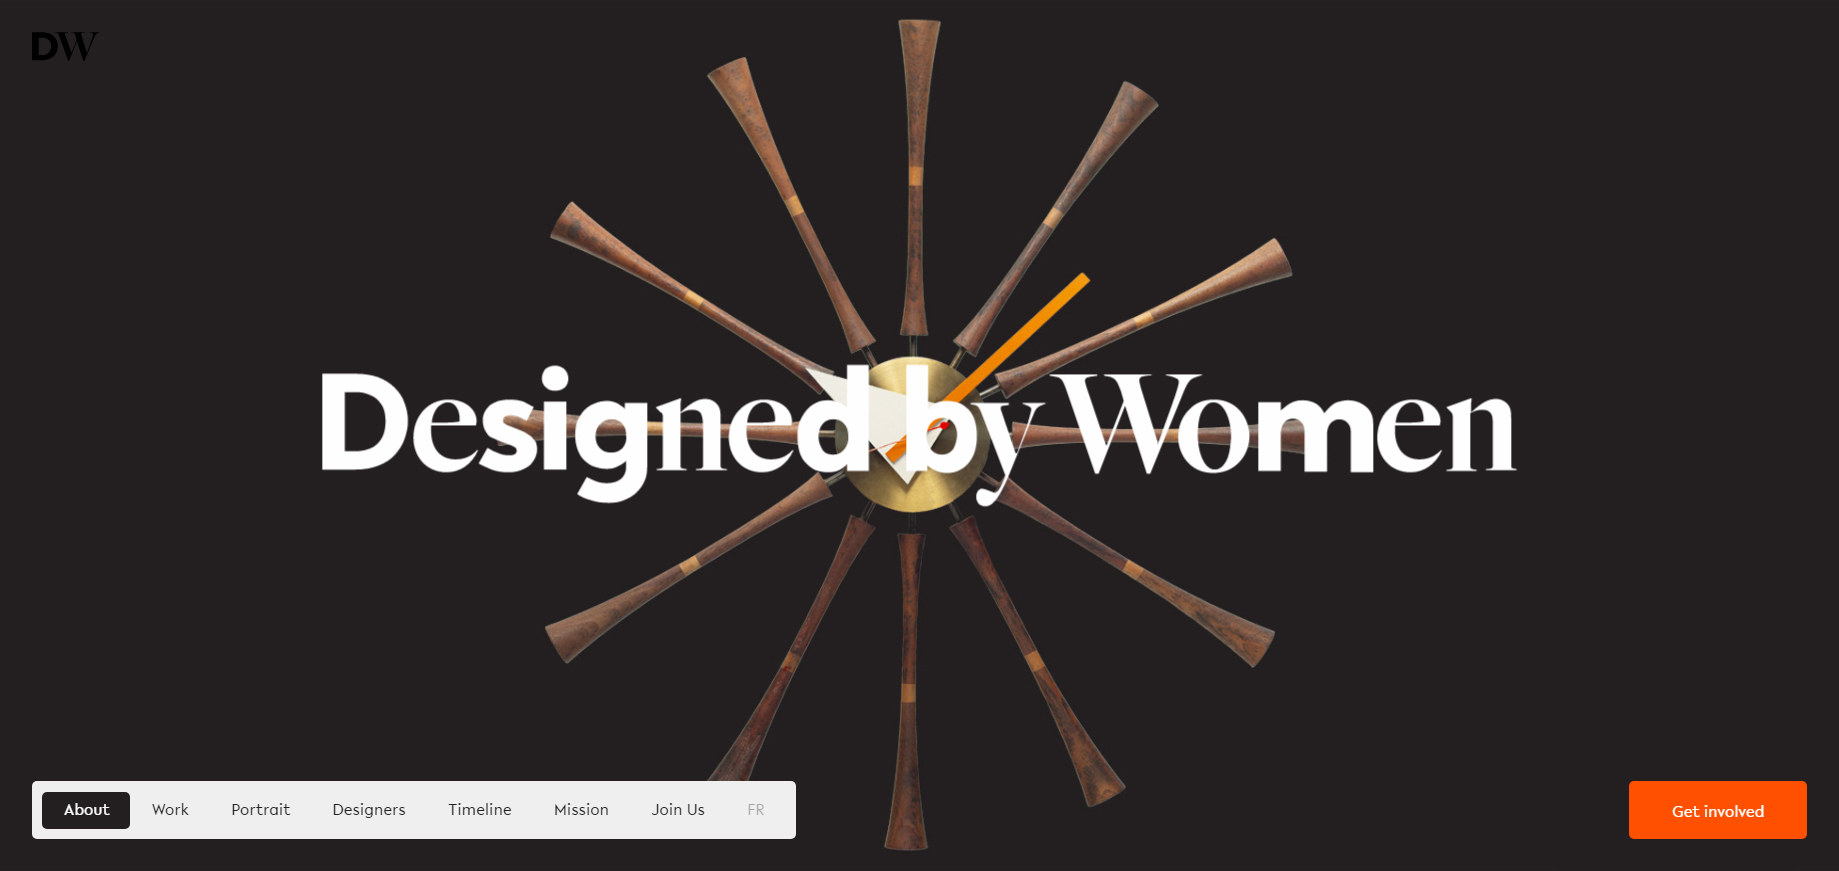 Designed by Women	 - Website of the Day